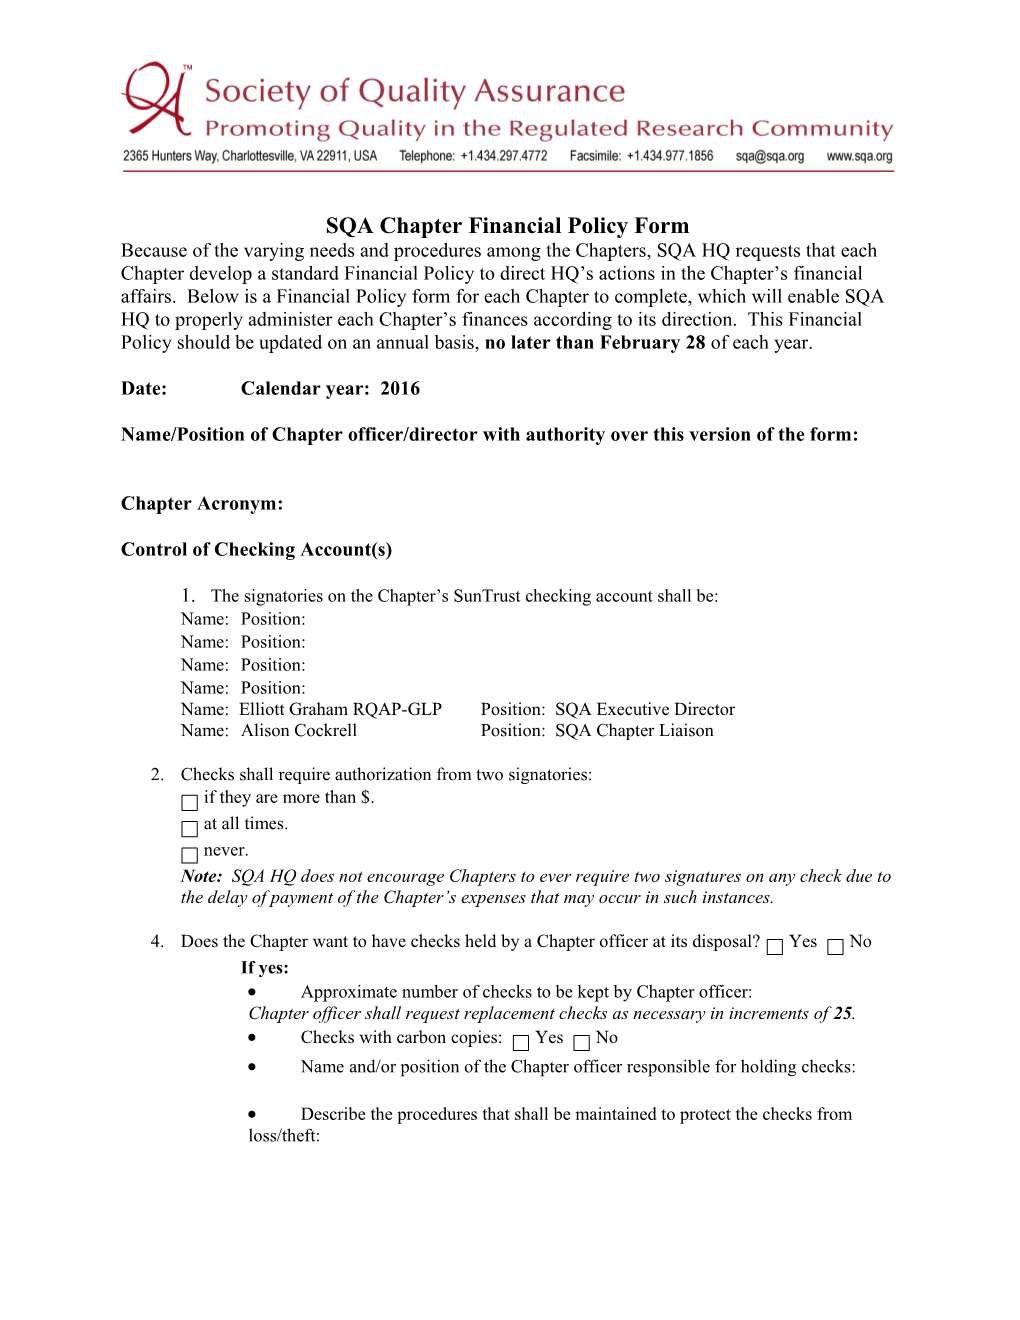 SQA Chapterfinancial Policy Form